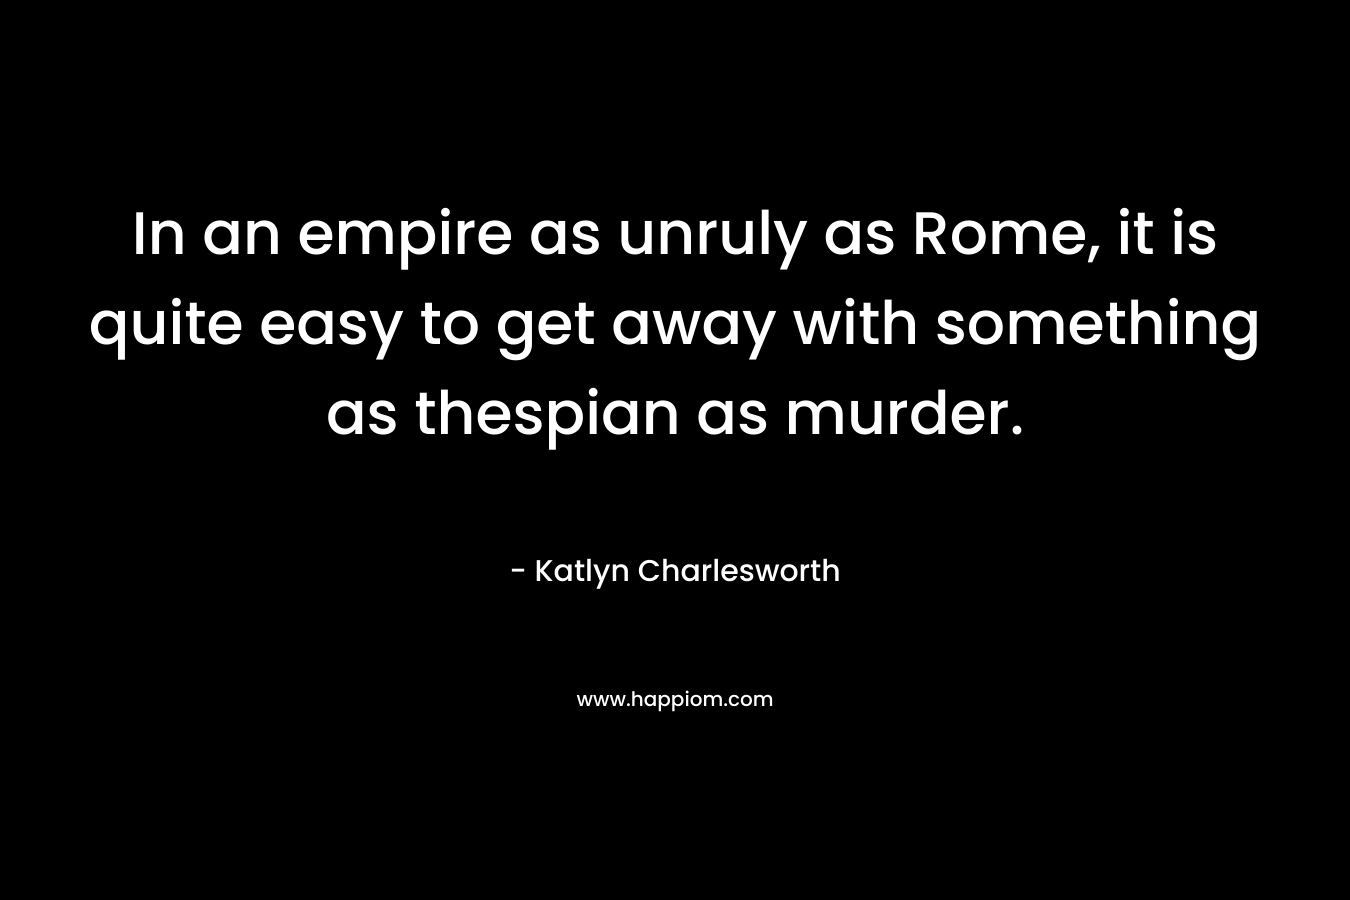 In an empire as unruly as Rome, it is quite easy to get away with something as thespian as murder.